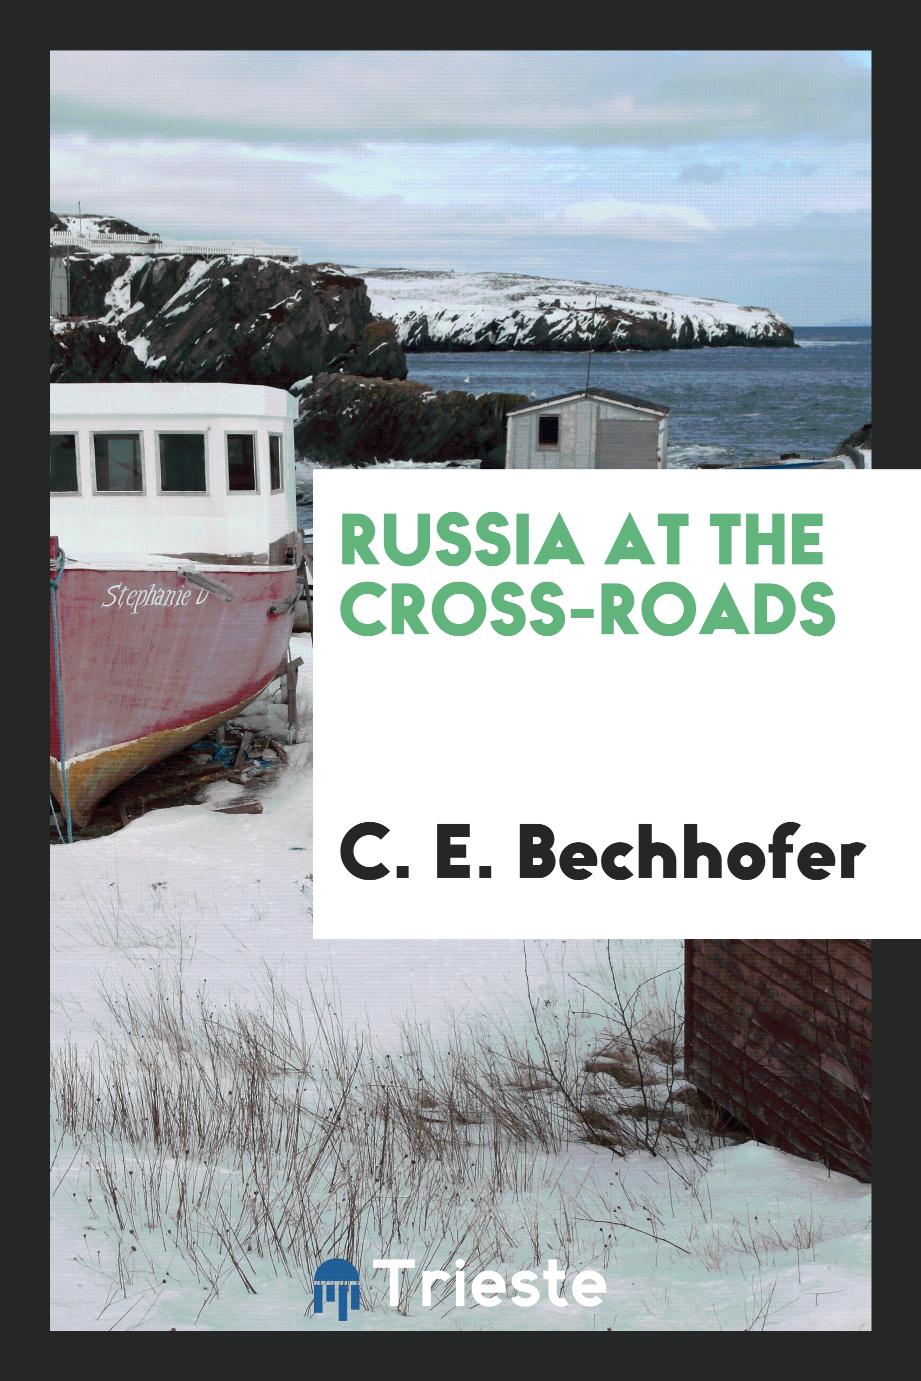 Russia at the cross-roads